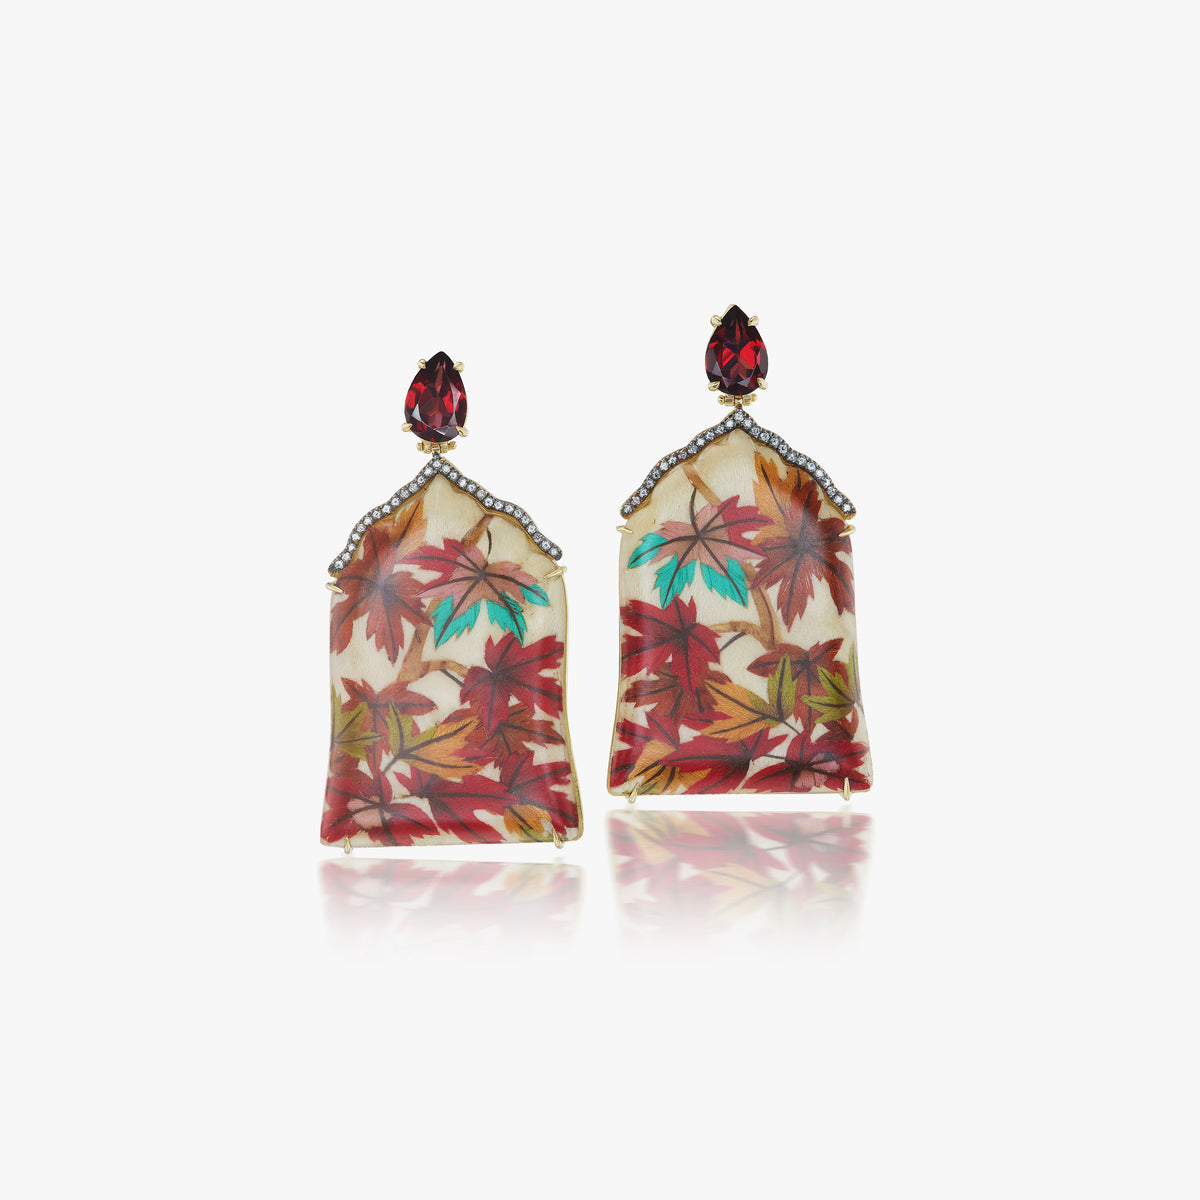 Marquetry earrings with diamond and garnet